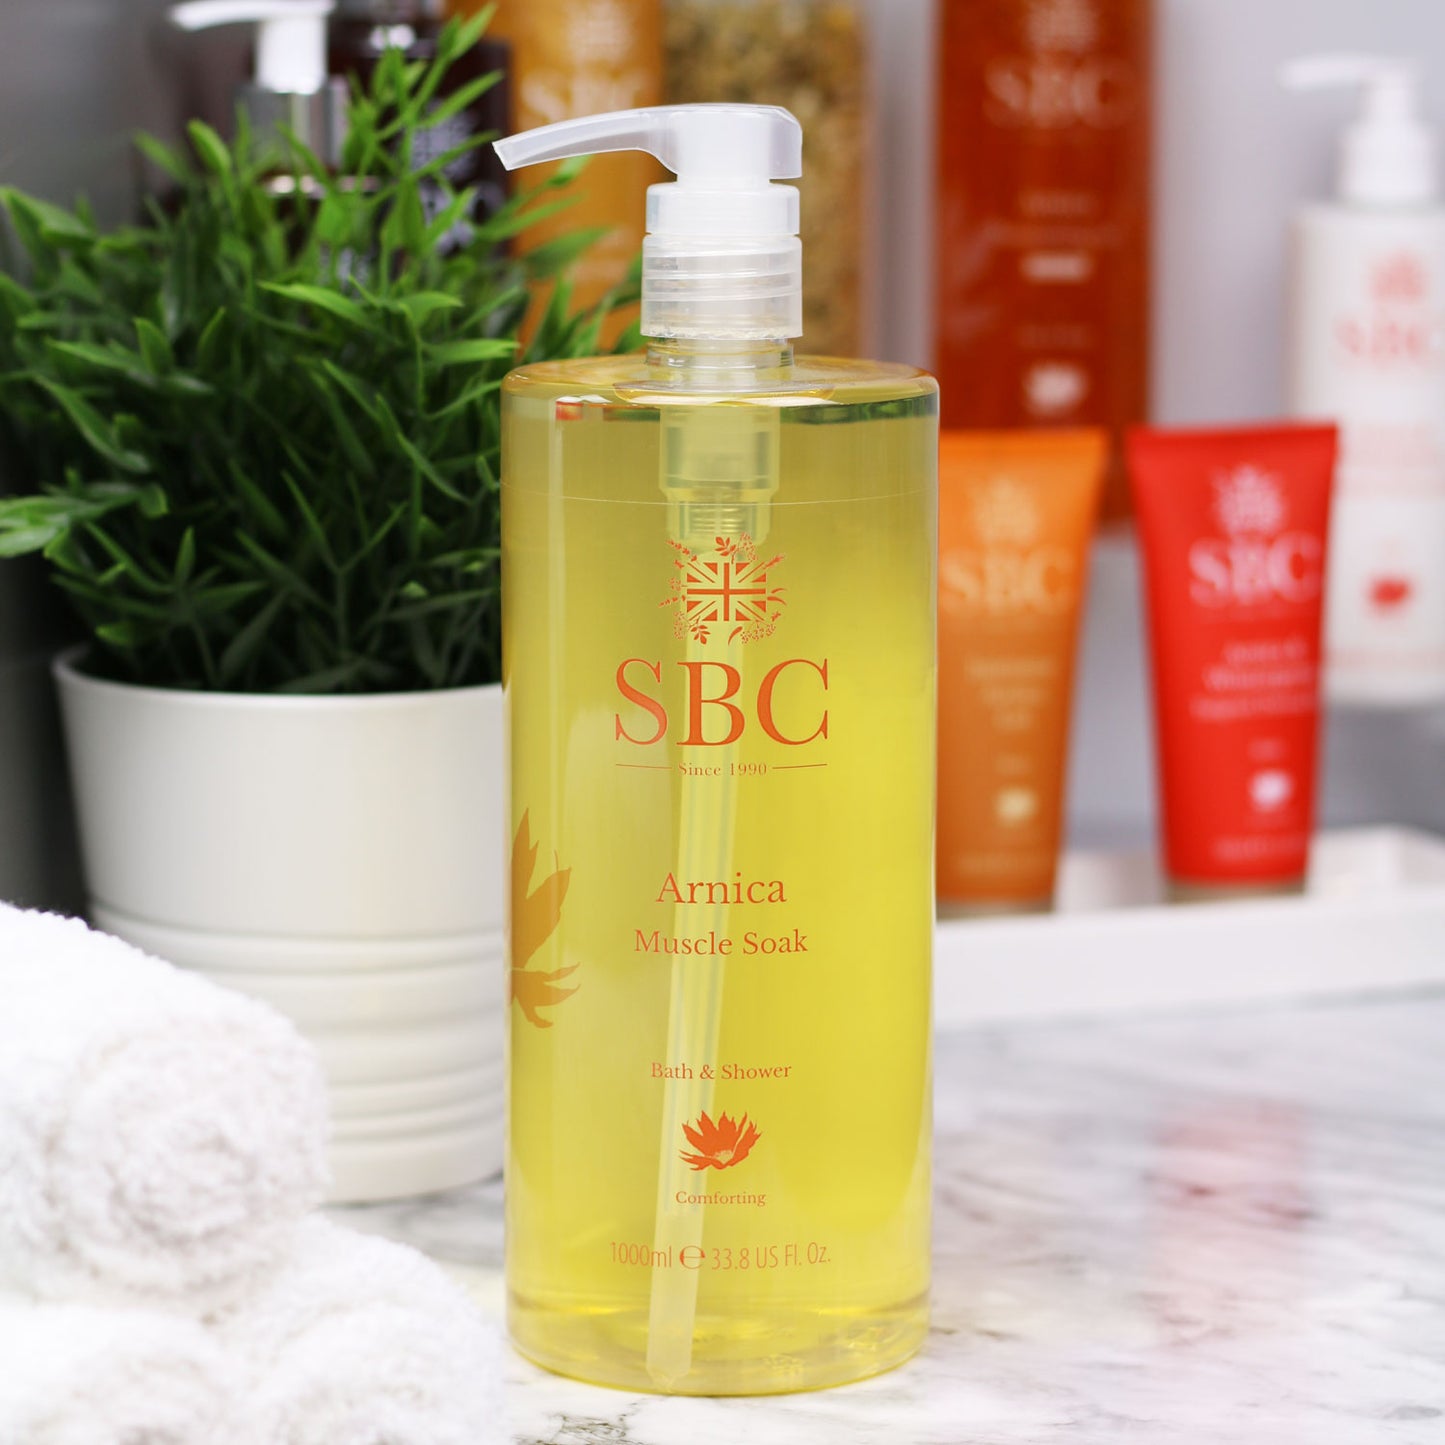 SBC Skincare Arnica Muscle Soak with Arnica products